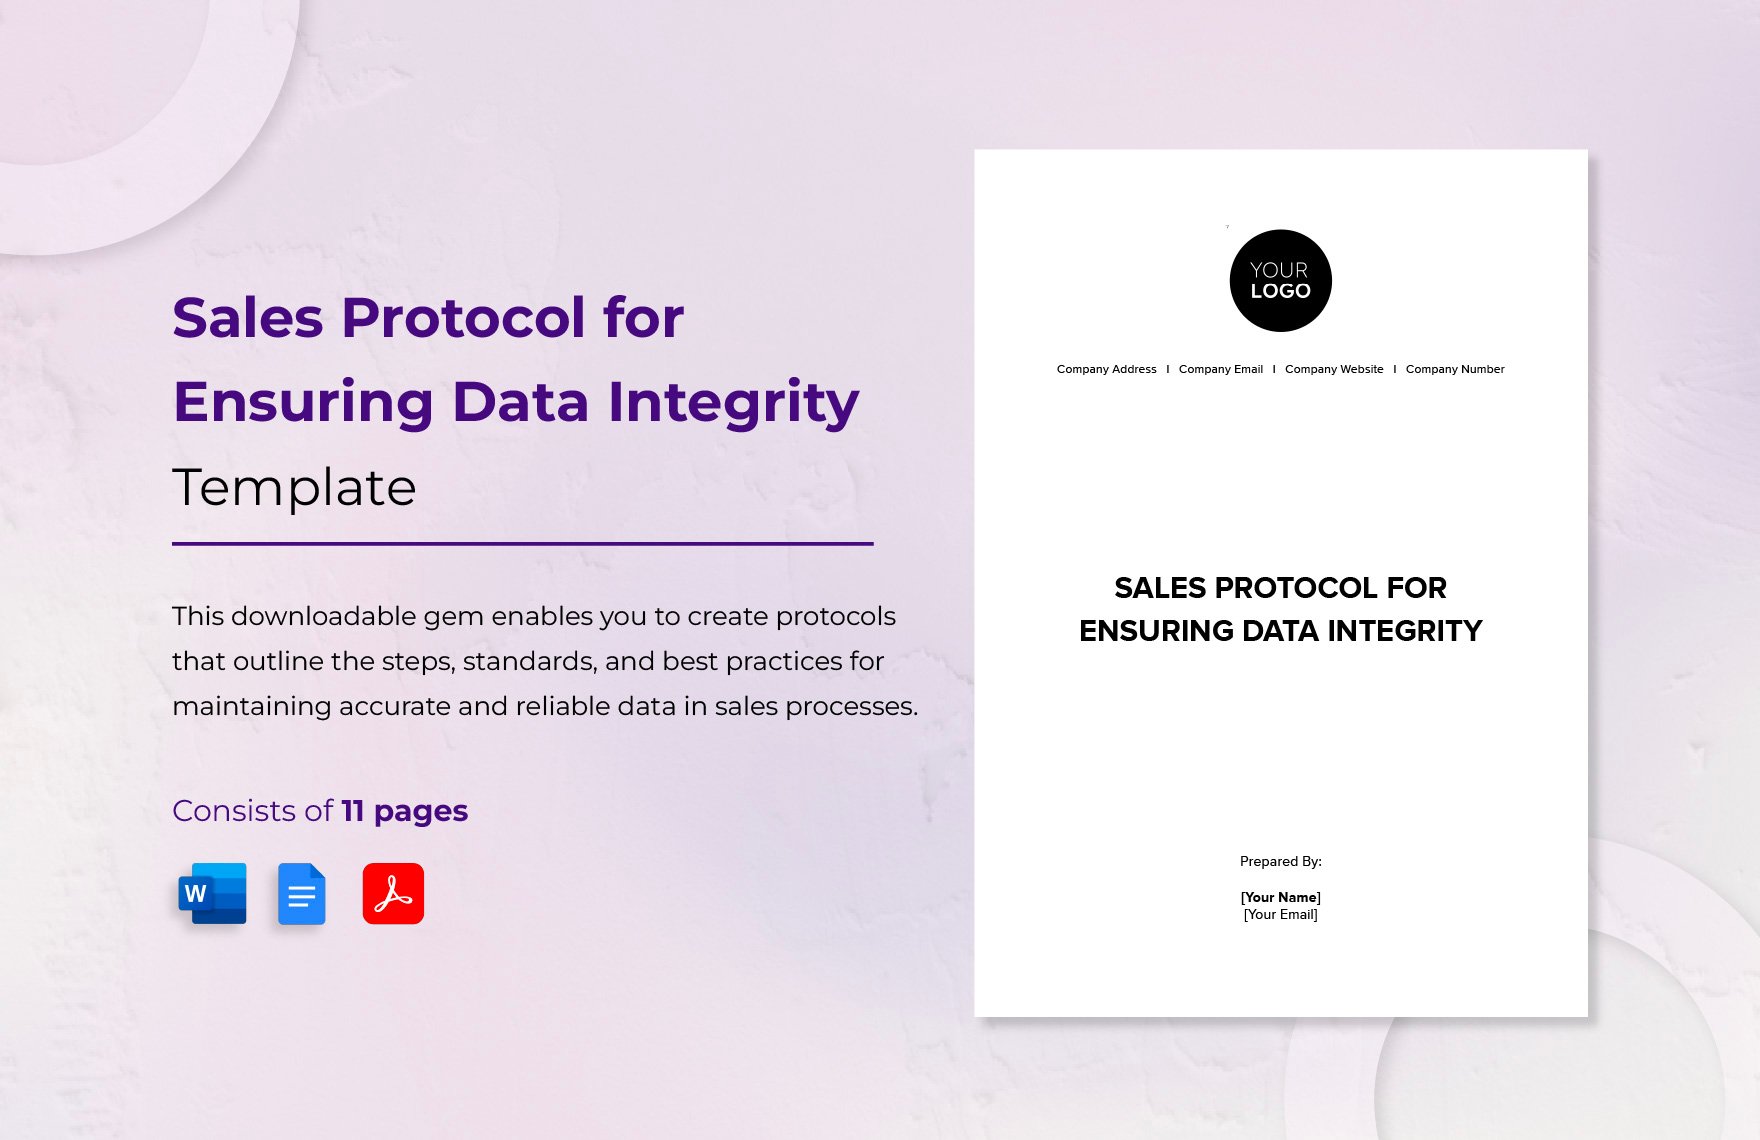 Sales Protocol for Ensuring Data Integrity Template